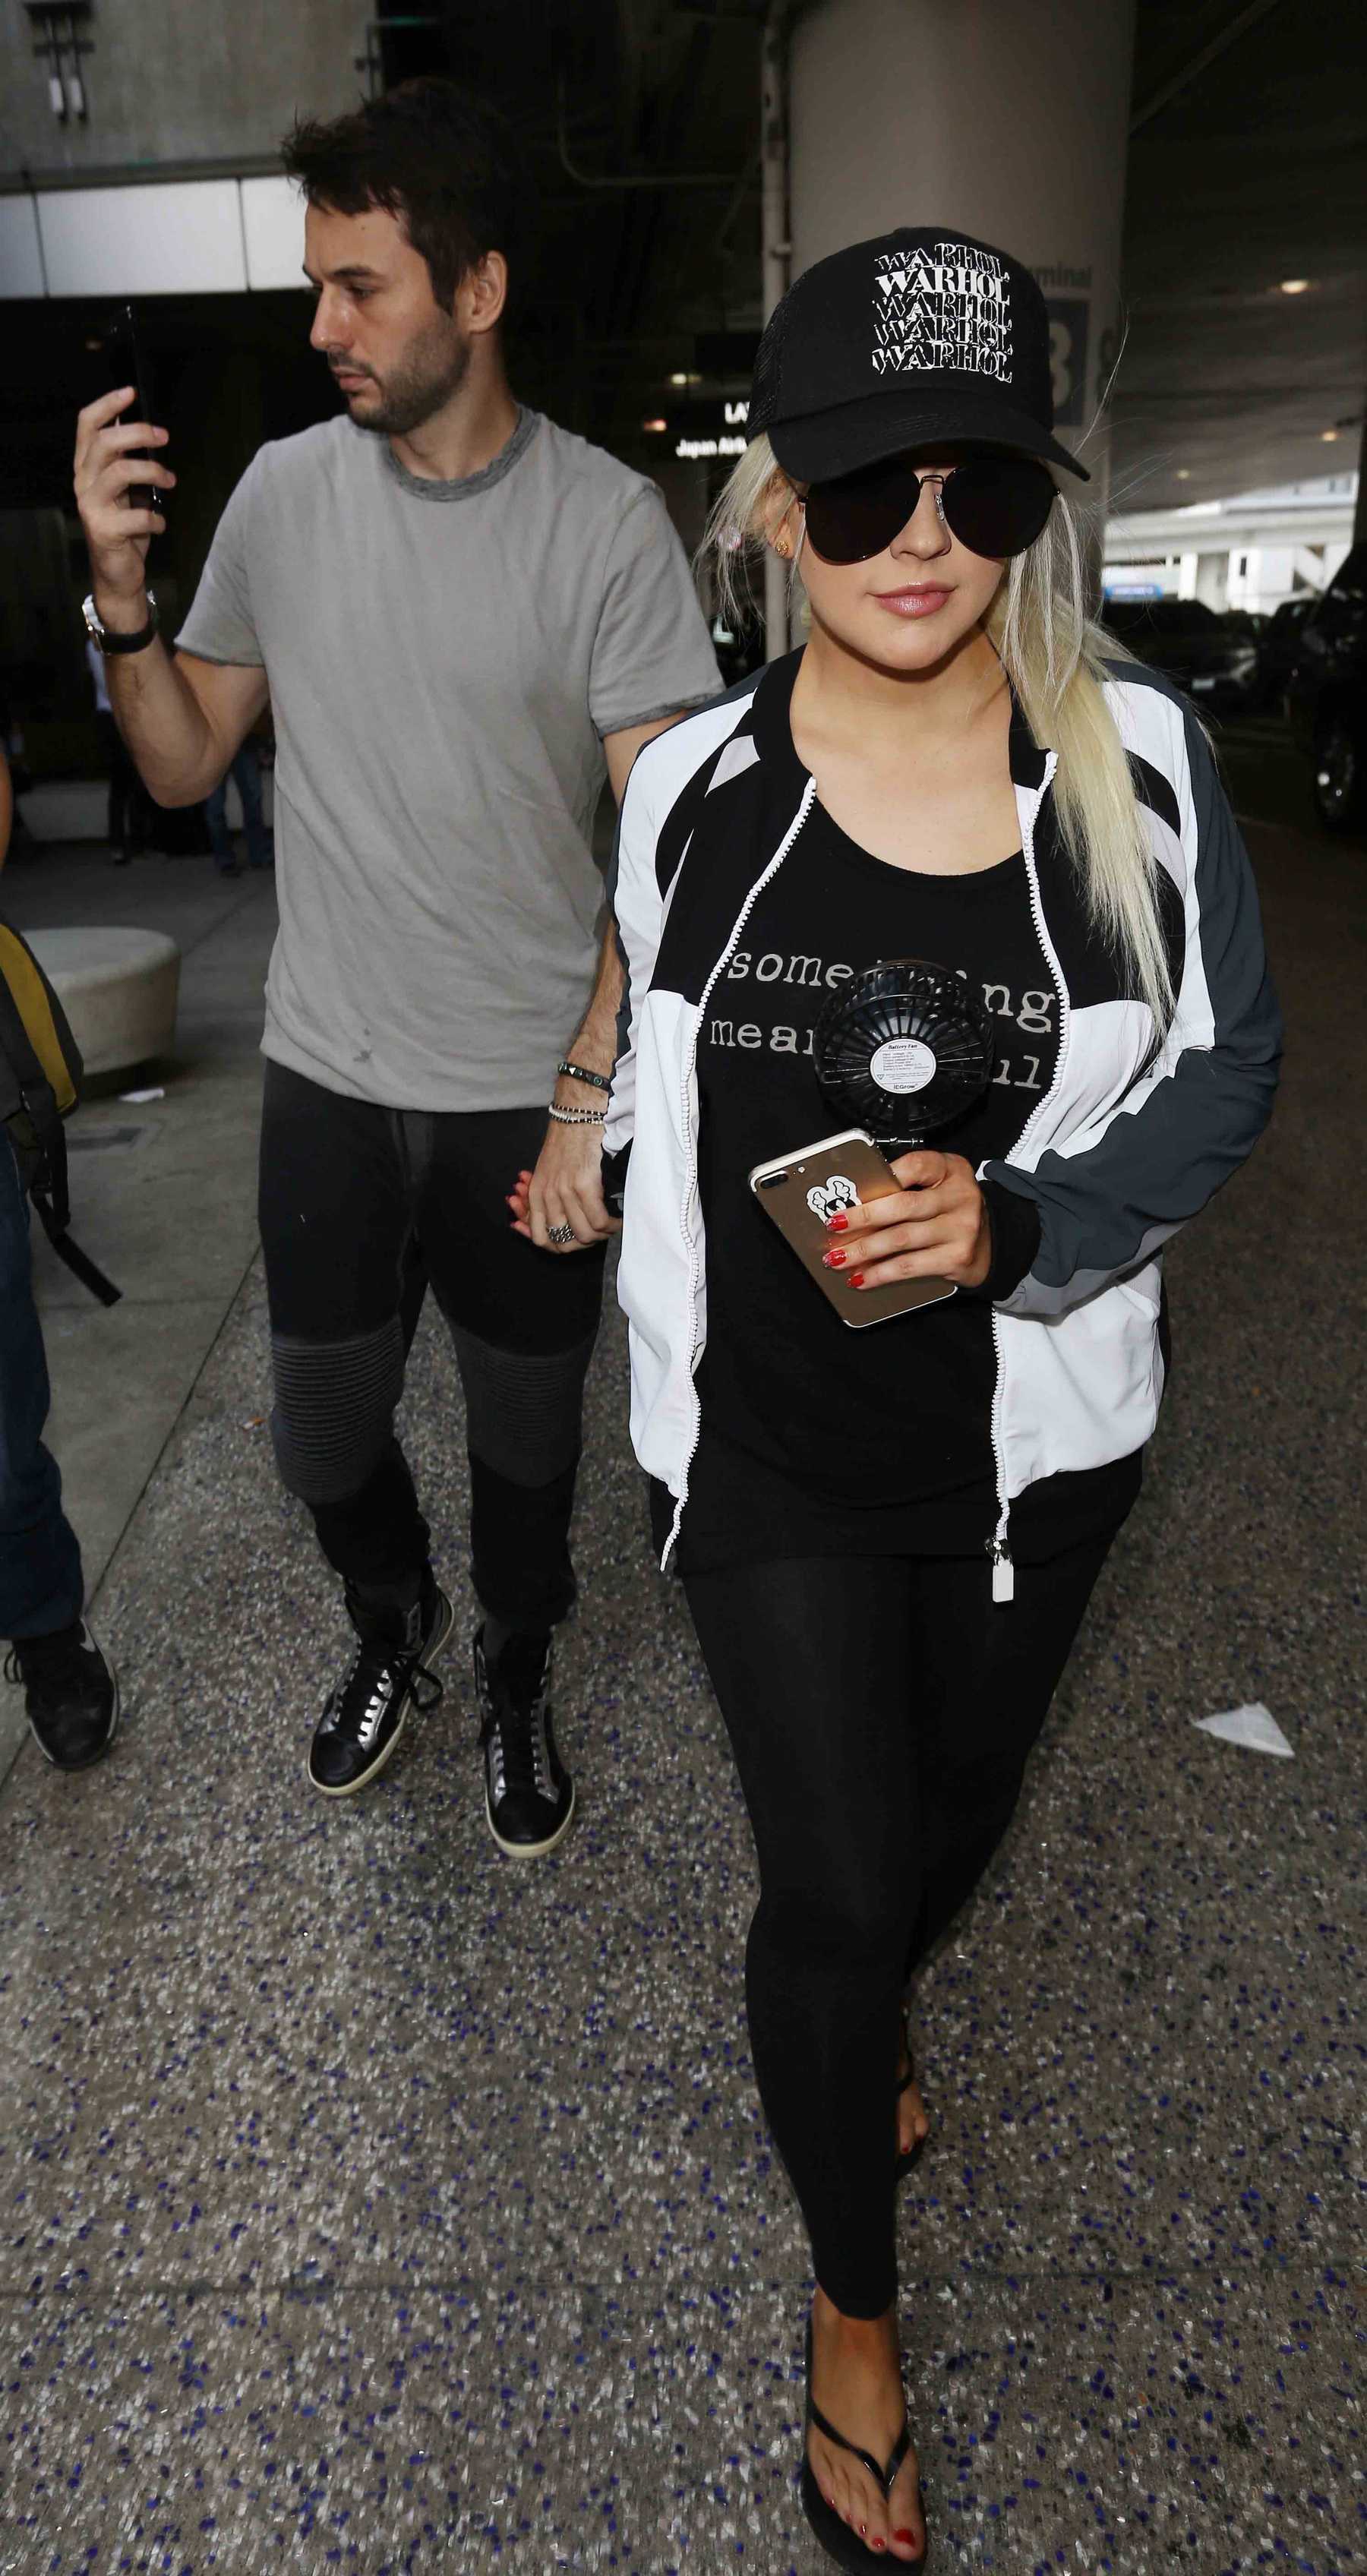 Christina_Aguilera_-_At_LAX_Airport_in_Los_Angeles_on_September_3-03.jpg